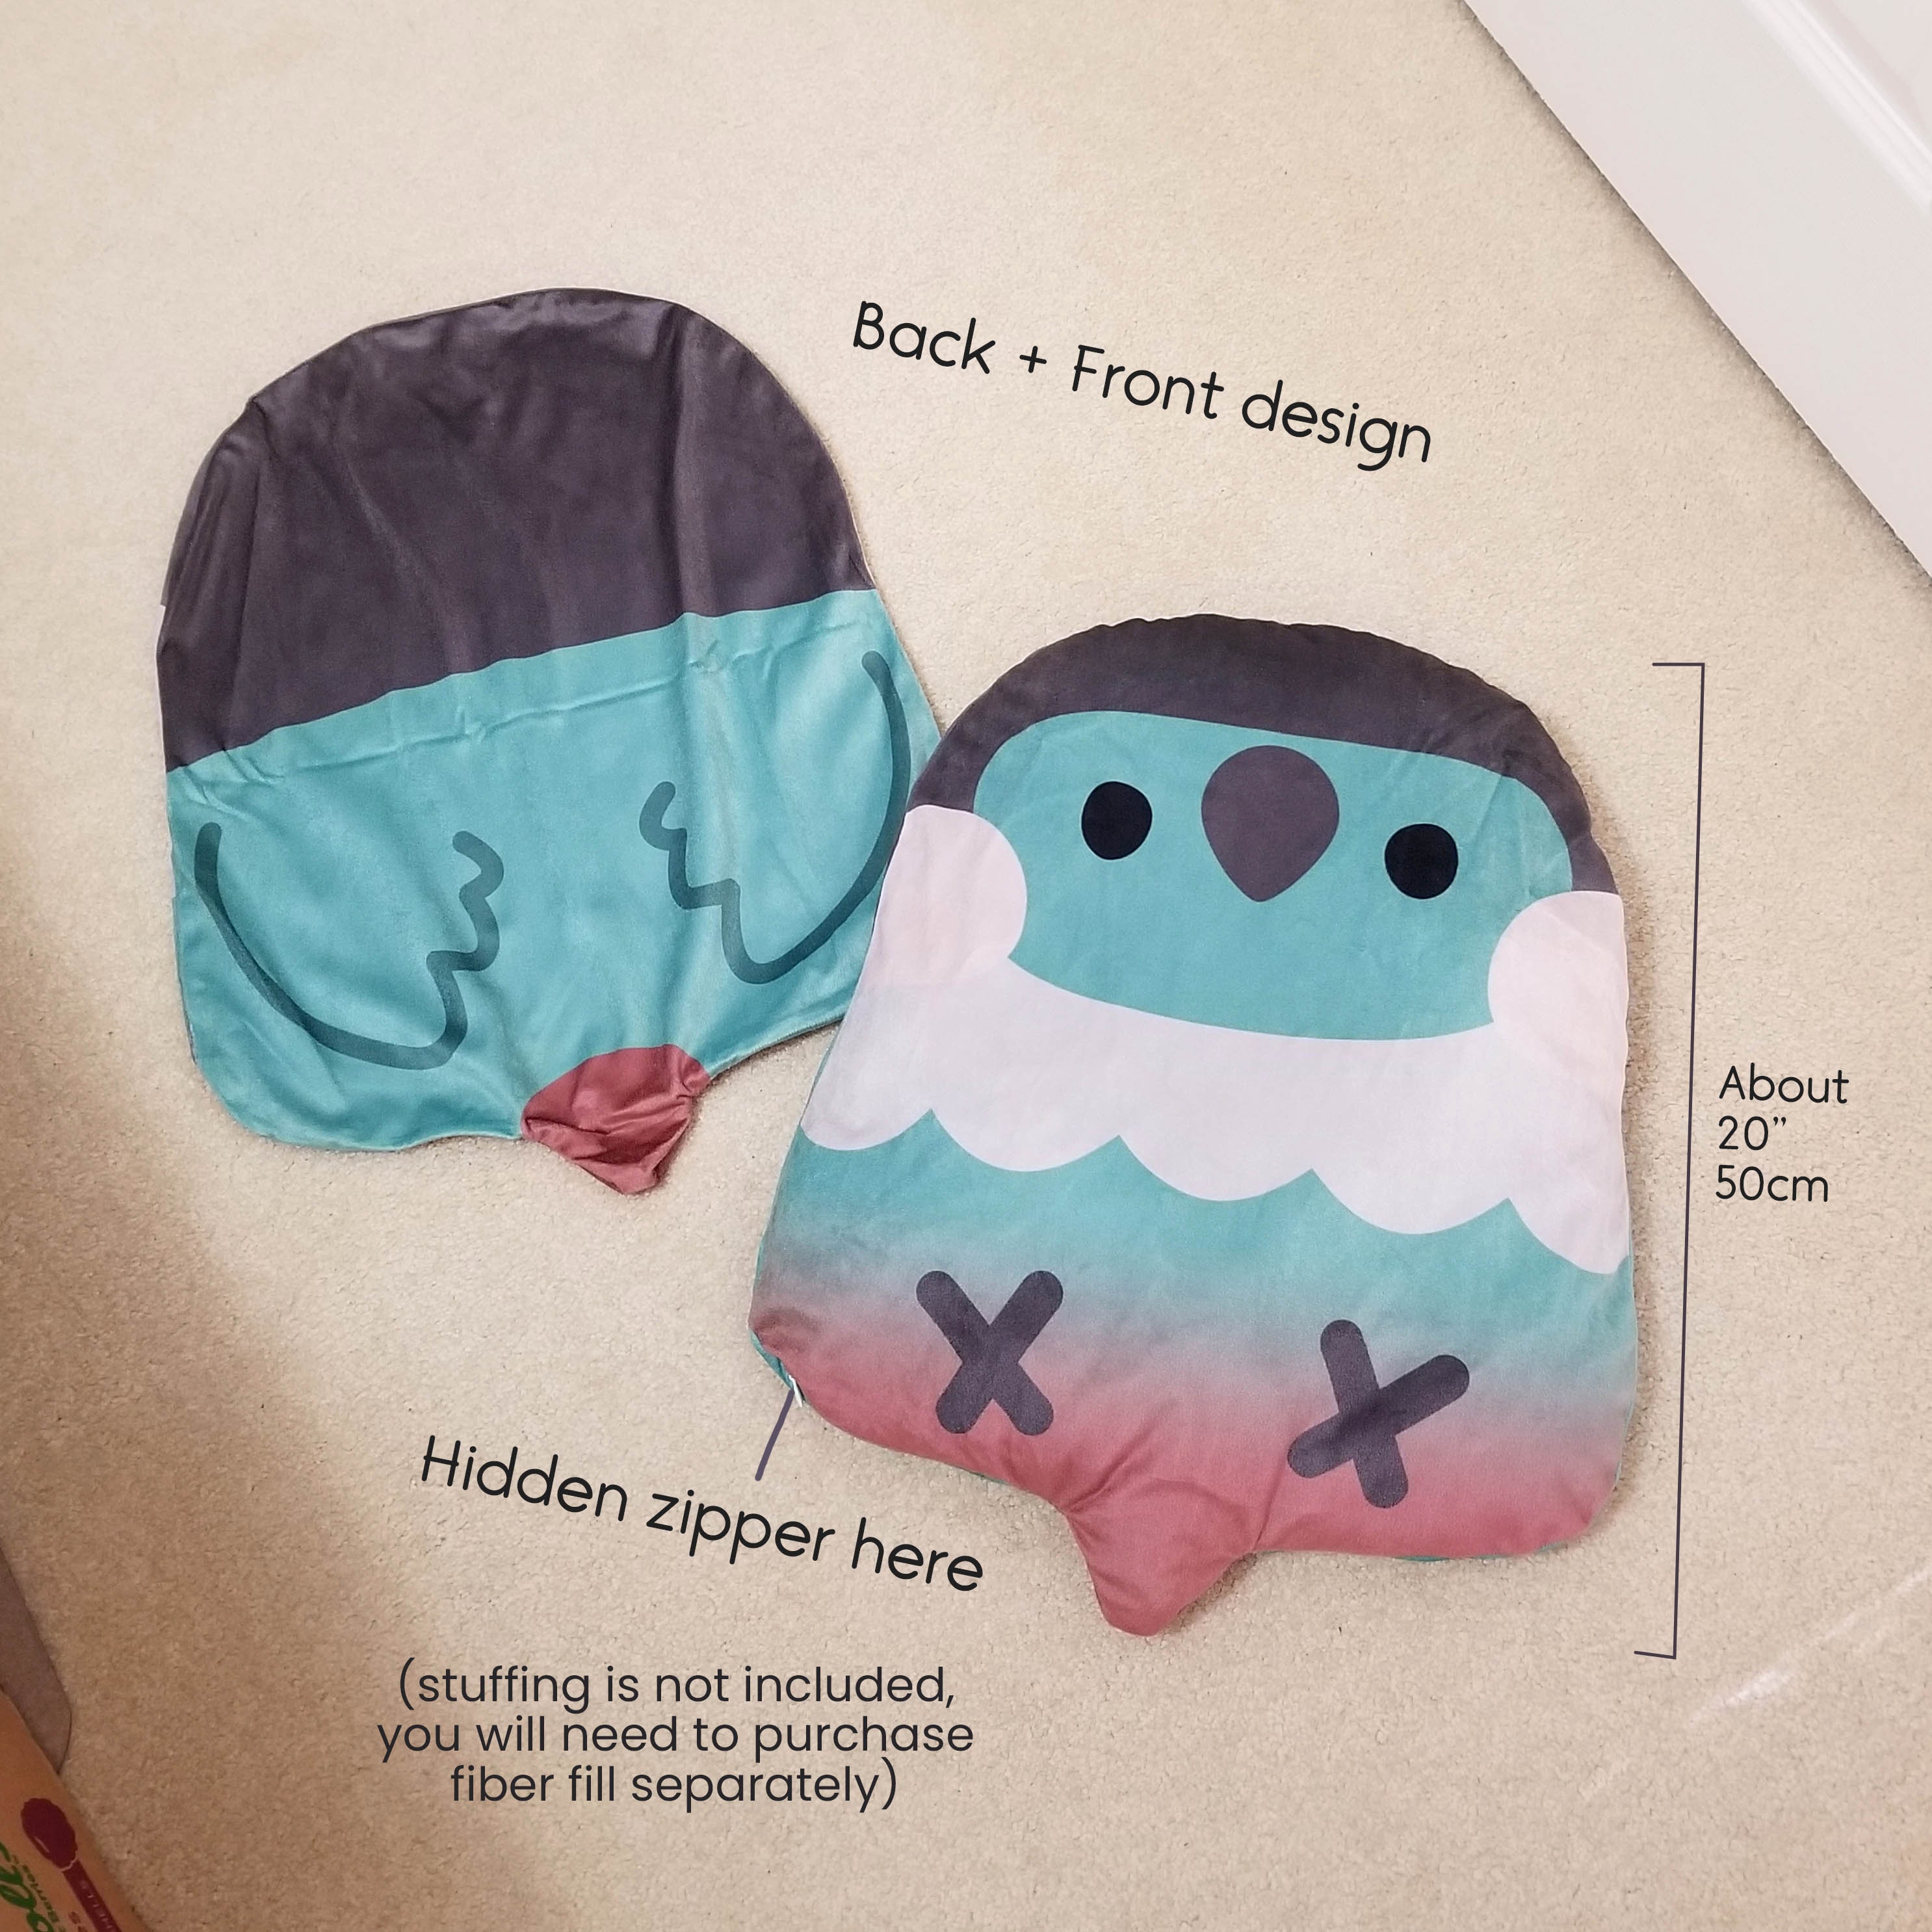 Birb Seat Pillow Case stuffing is Not Included, You Need to Get Filling  Separately 